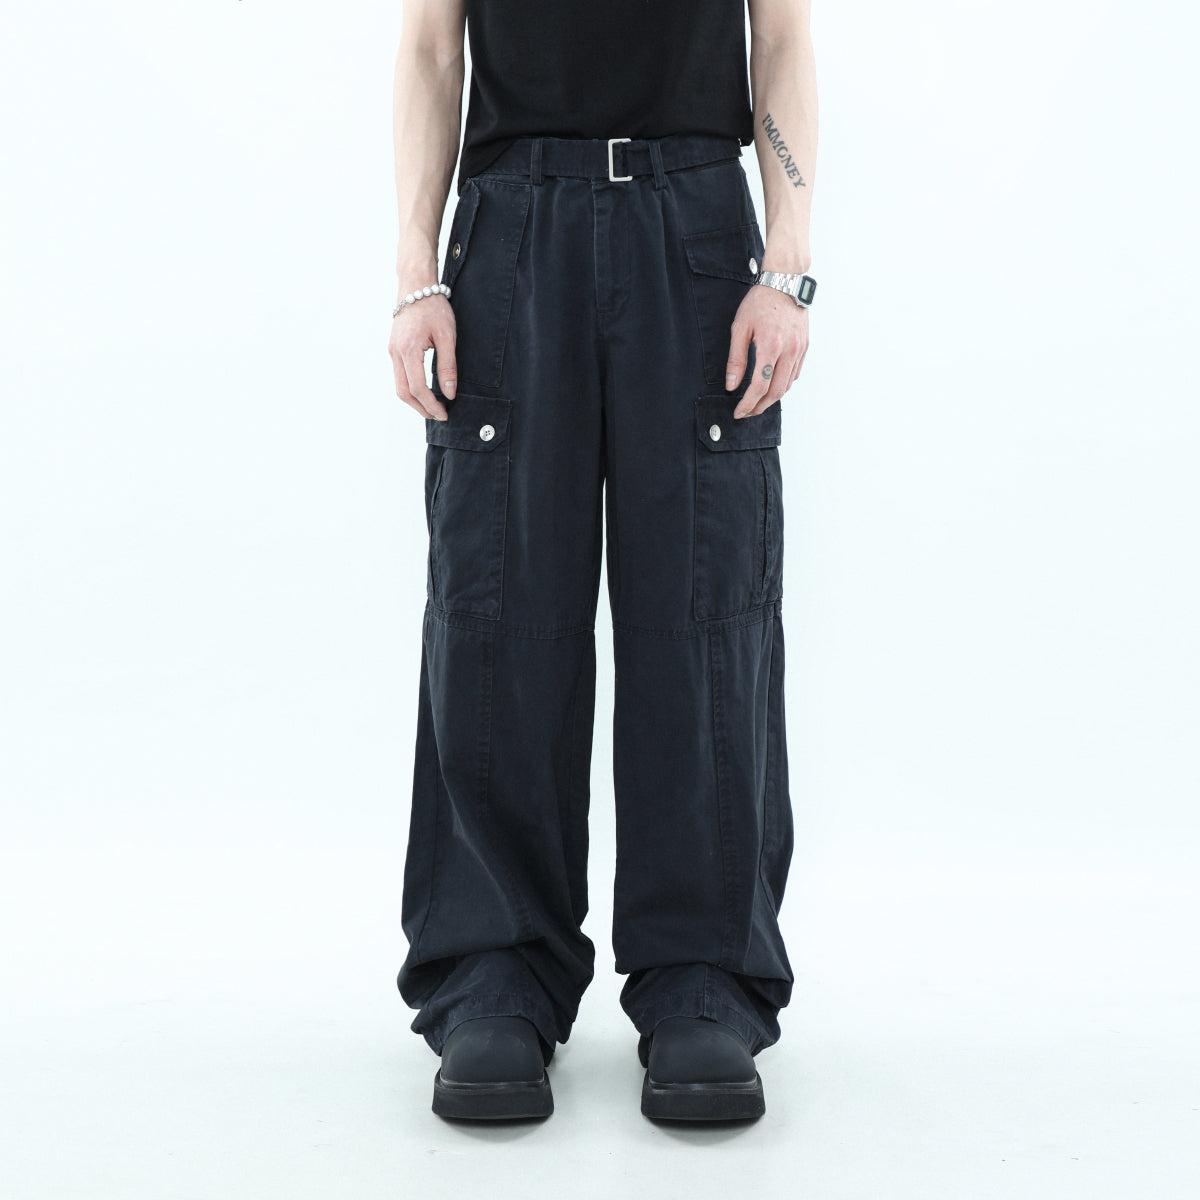 Mr Nearly Buckle Belt Cargo Style Pants Korean Street Fashion Pants By Mr Nearly Shop Online at OH Vault